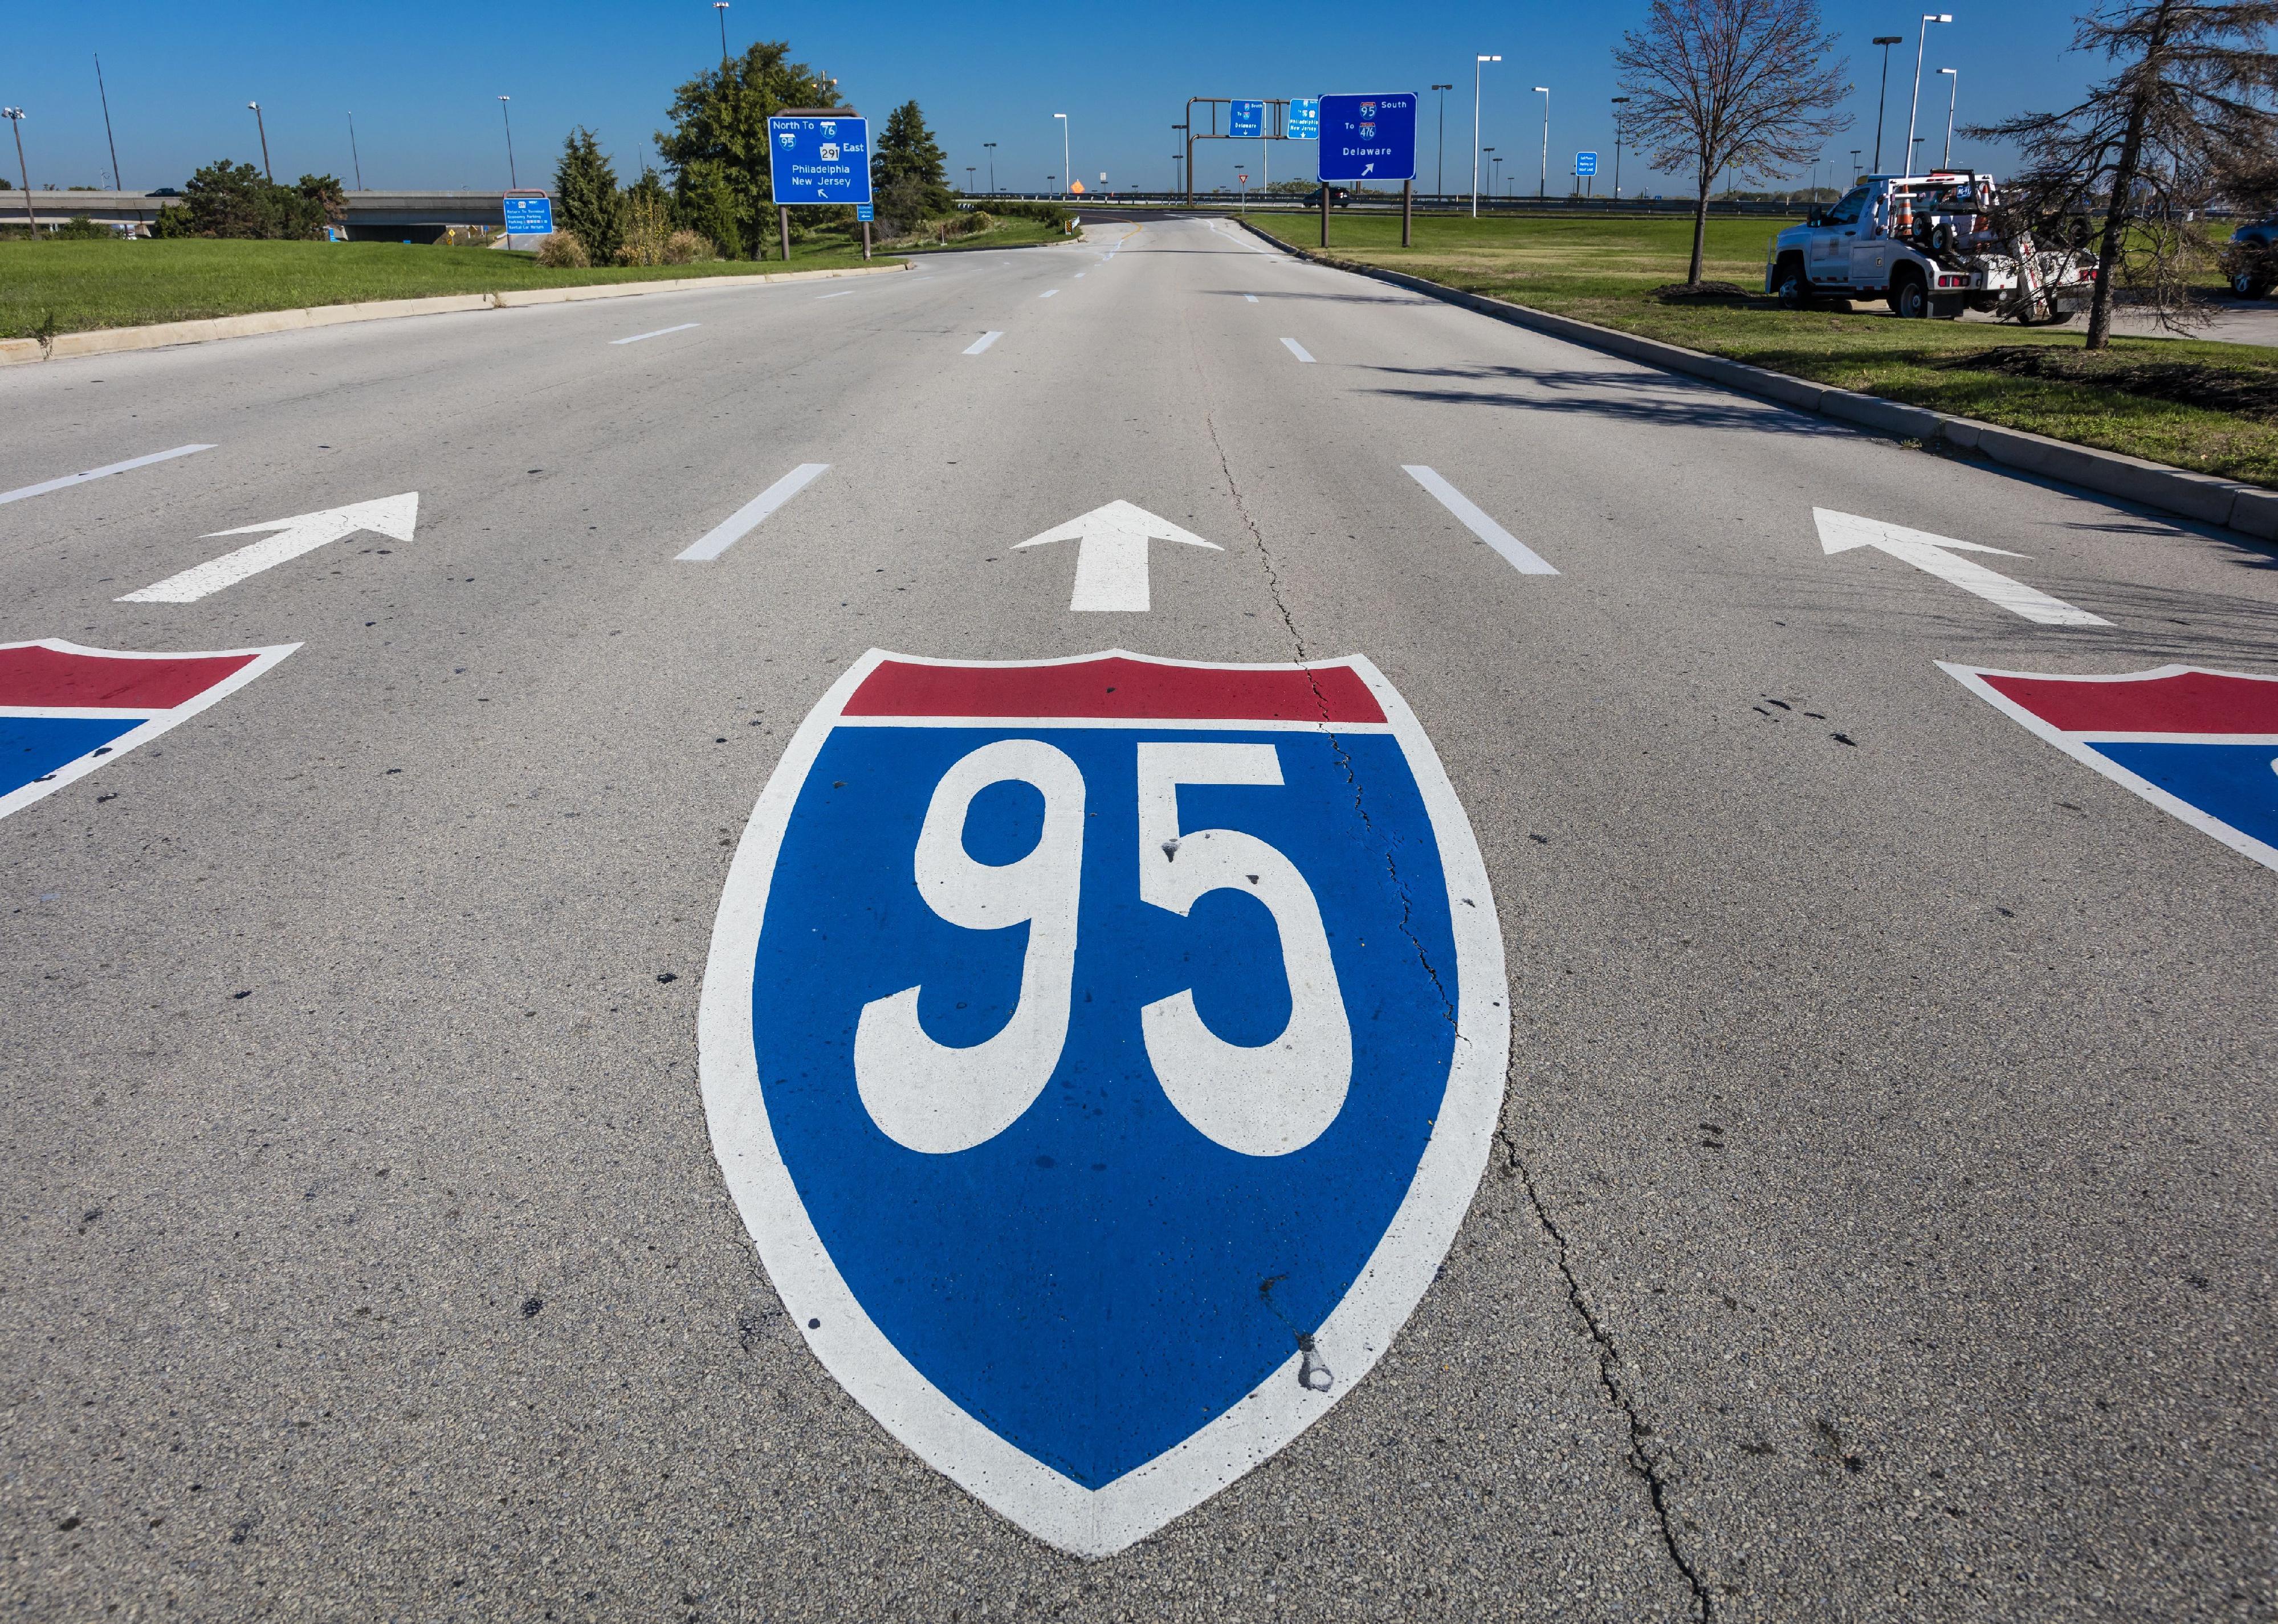 <p>Interstate 95 is the East Coast's primary highway. Stretching from Florida to Maine, road trippers looking to drive the length of the Atlantic Coast will spend most, if not all, of their trip on this interstate highway.</p>